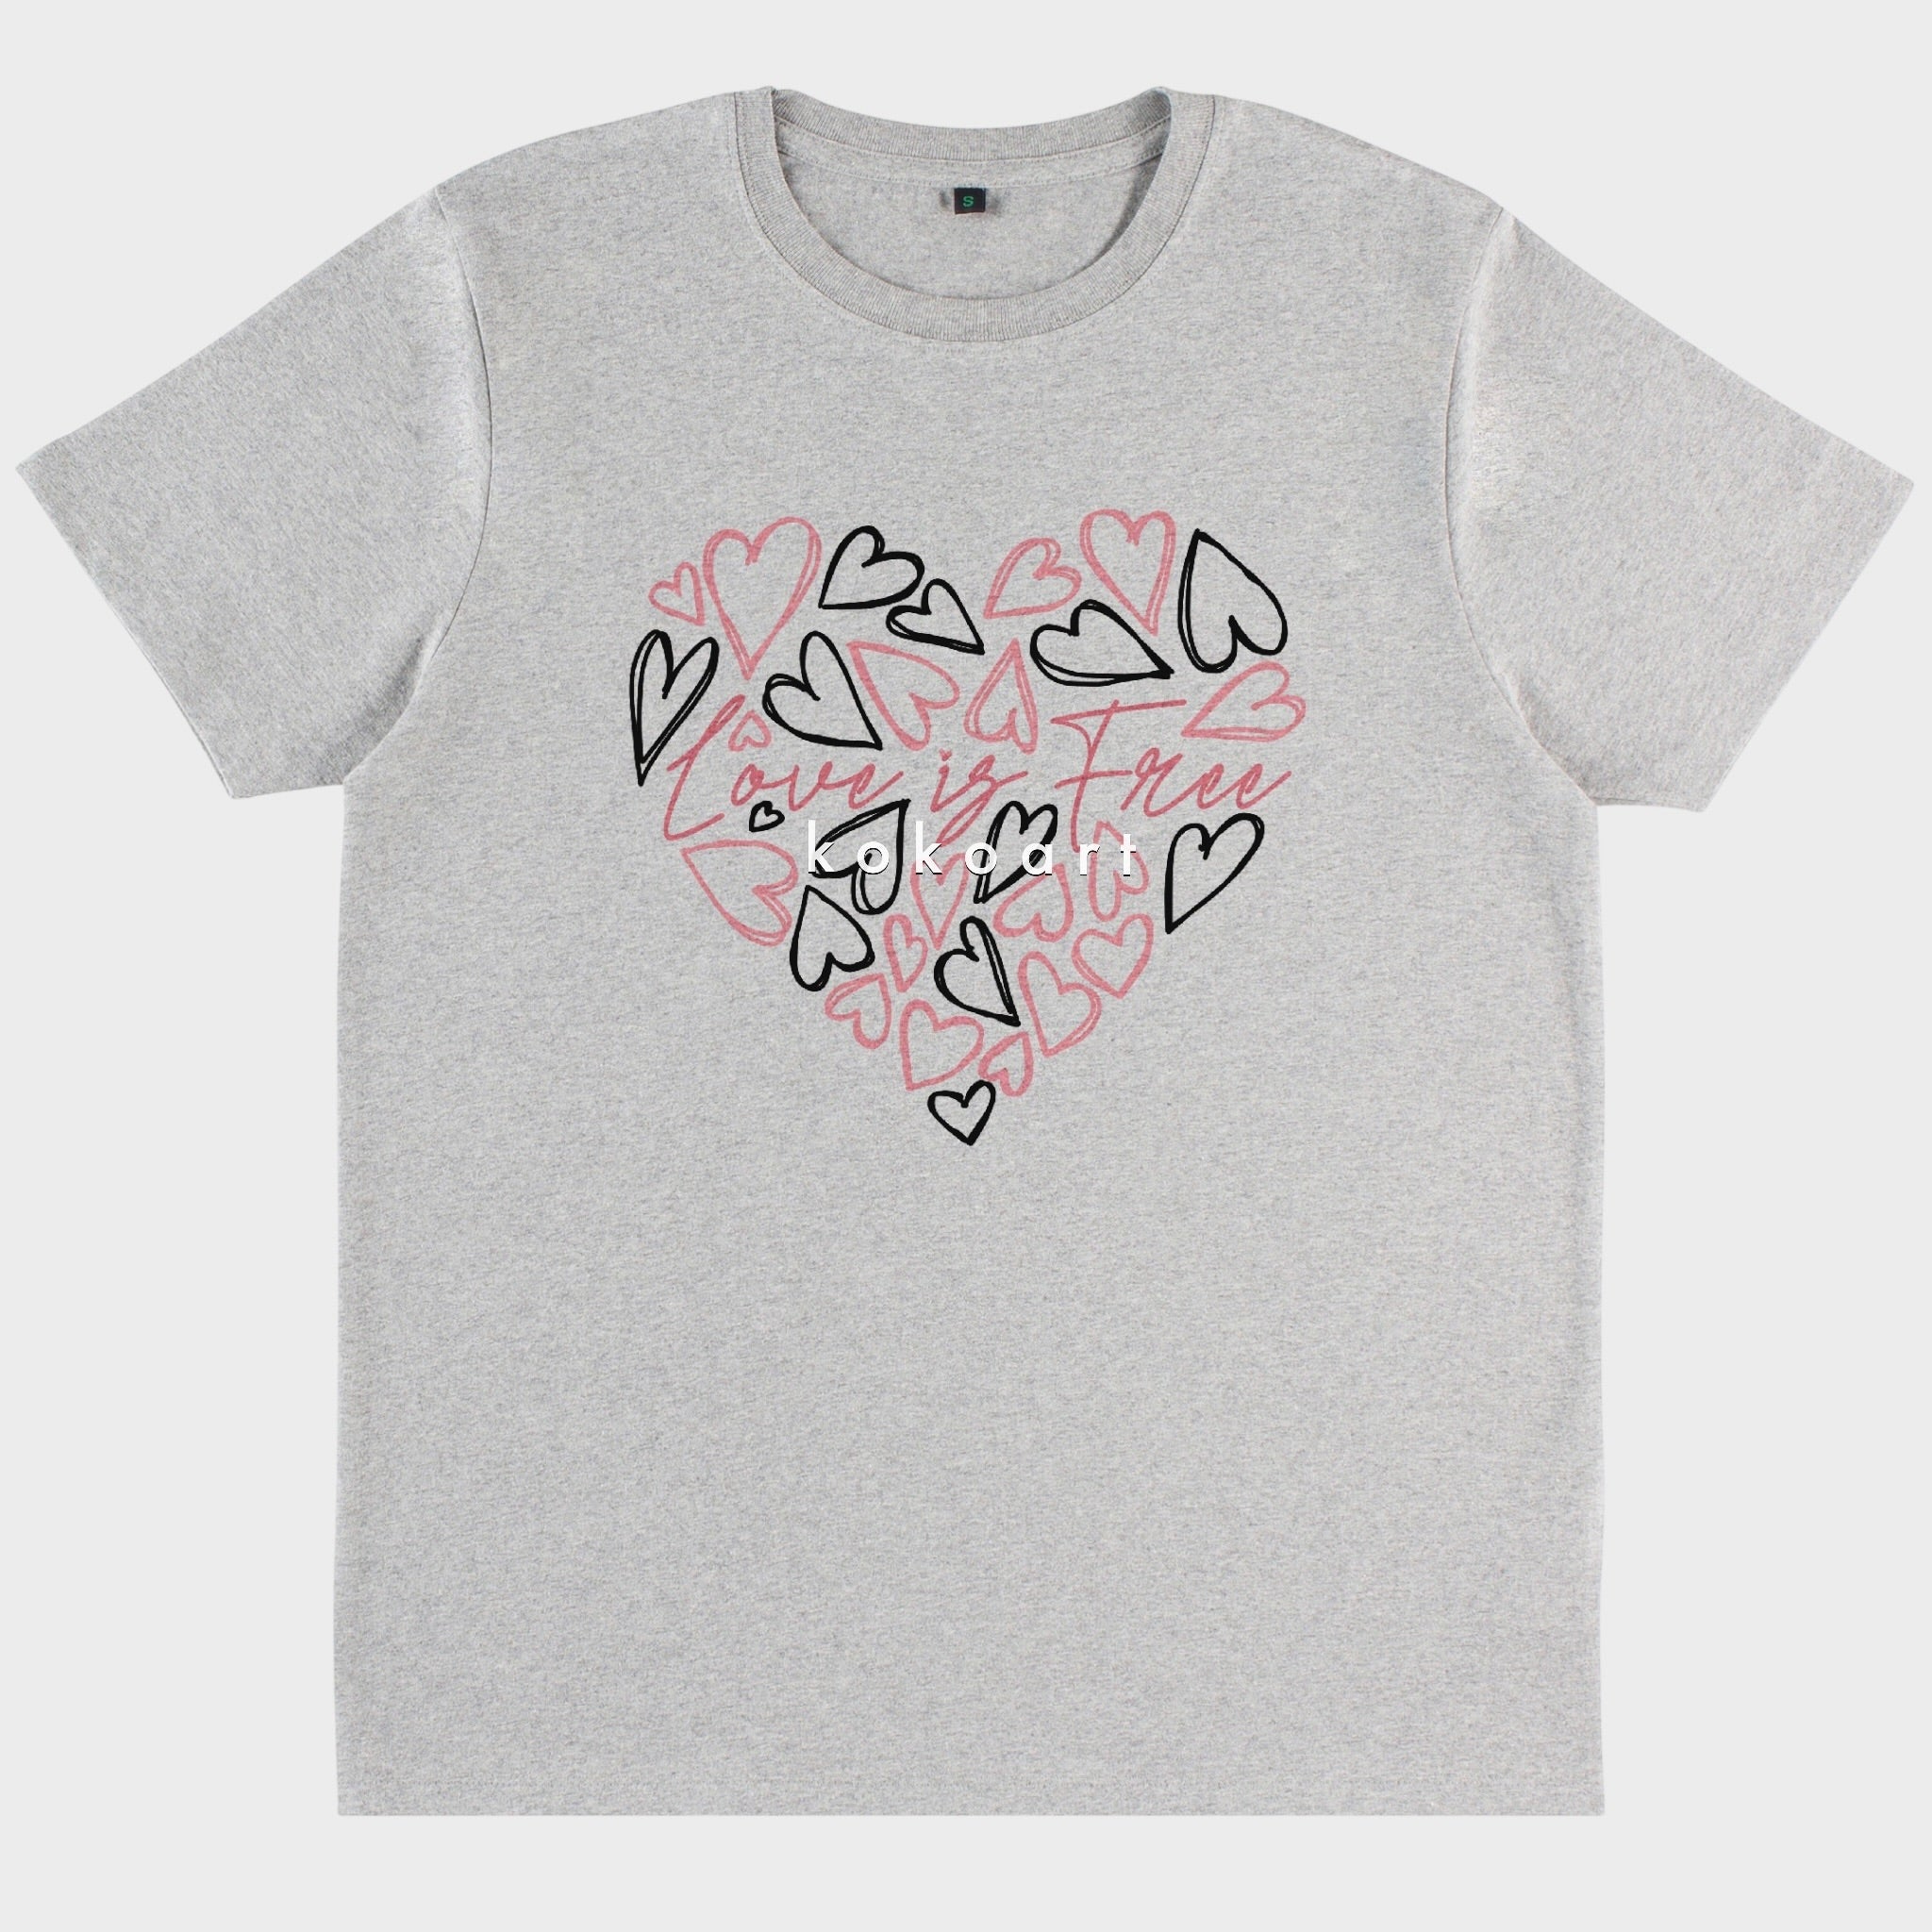 Love is Free Organic Cotton Clothing